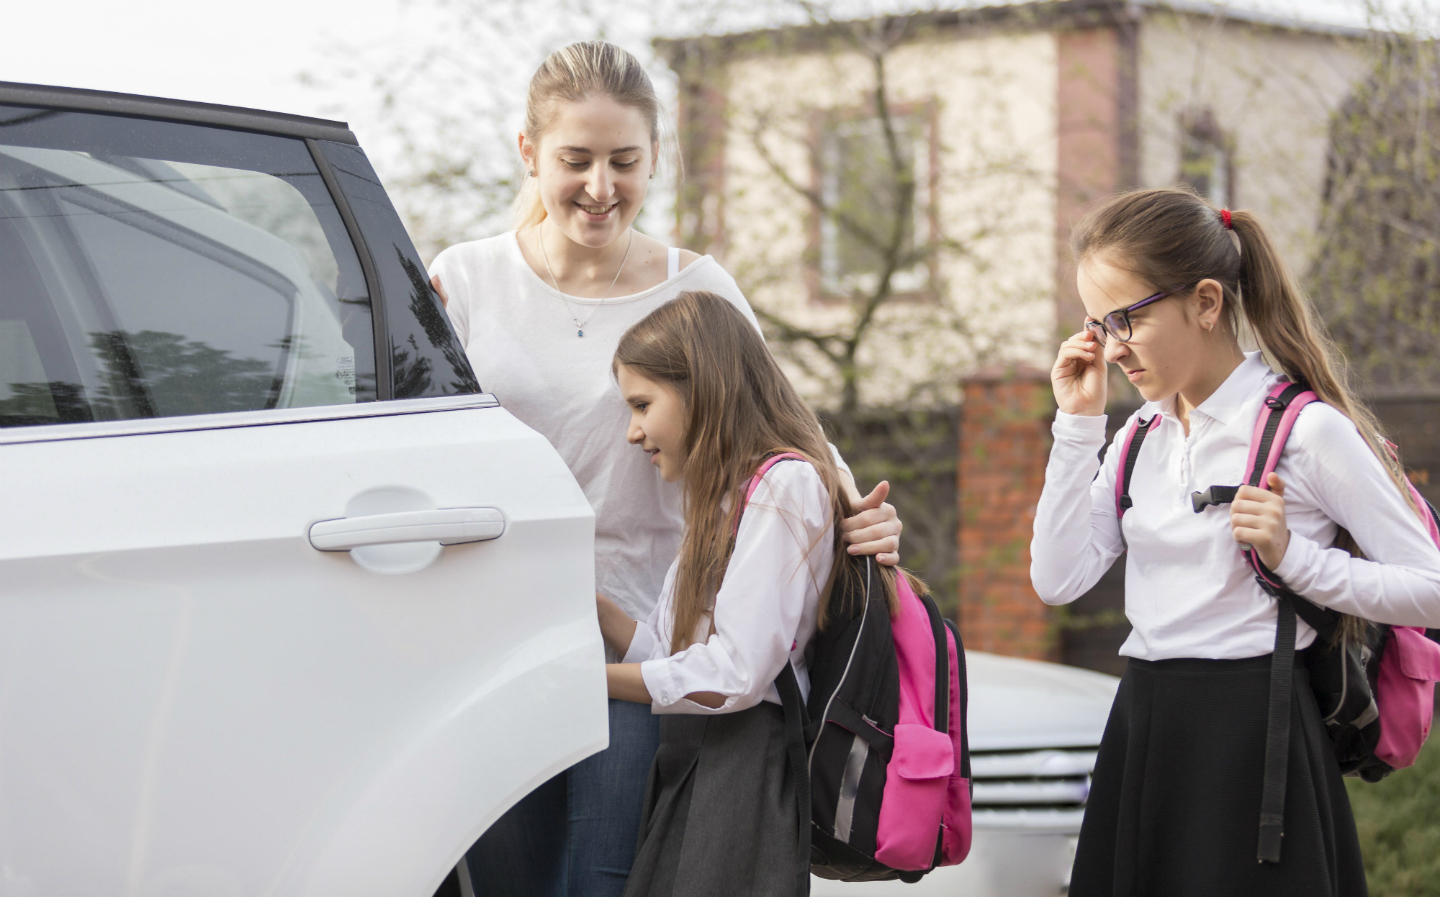 Parents lose four days a year on average getting their kids ready for car journeys